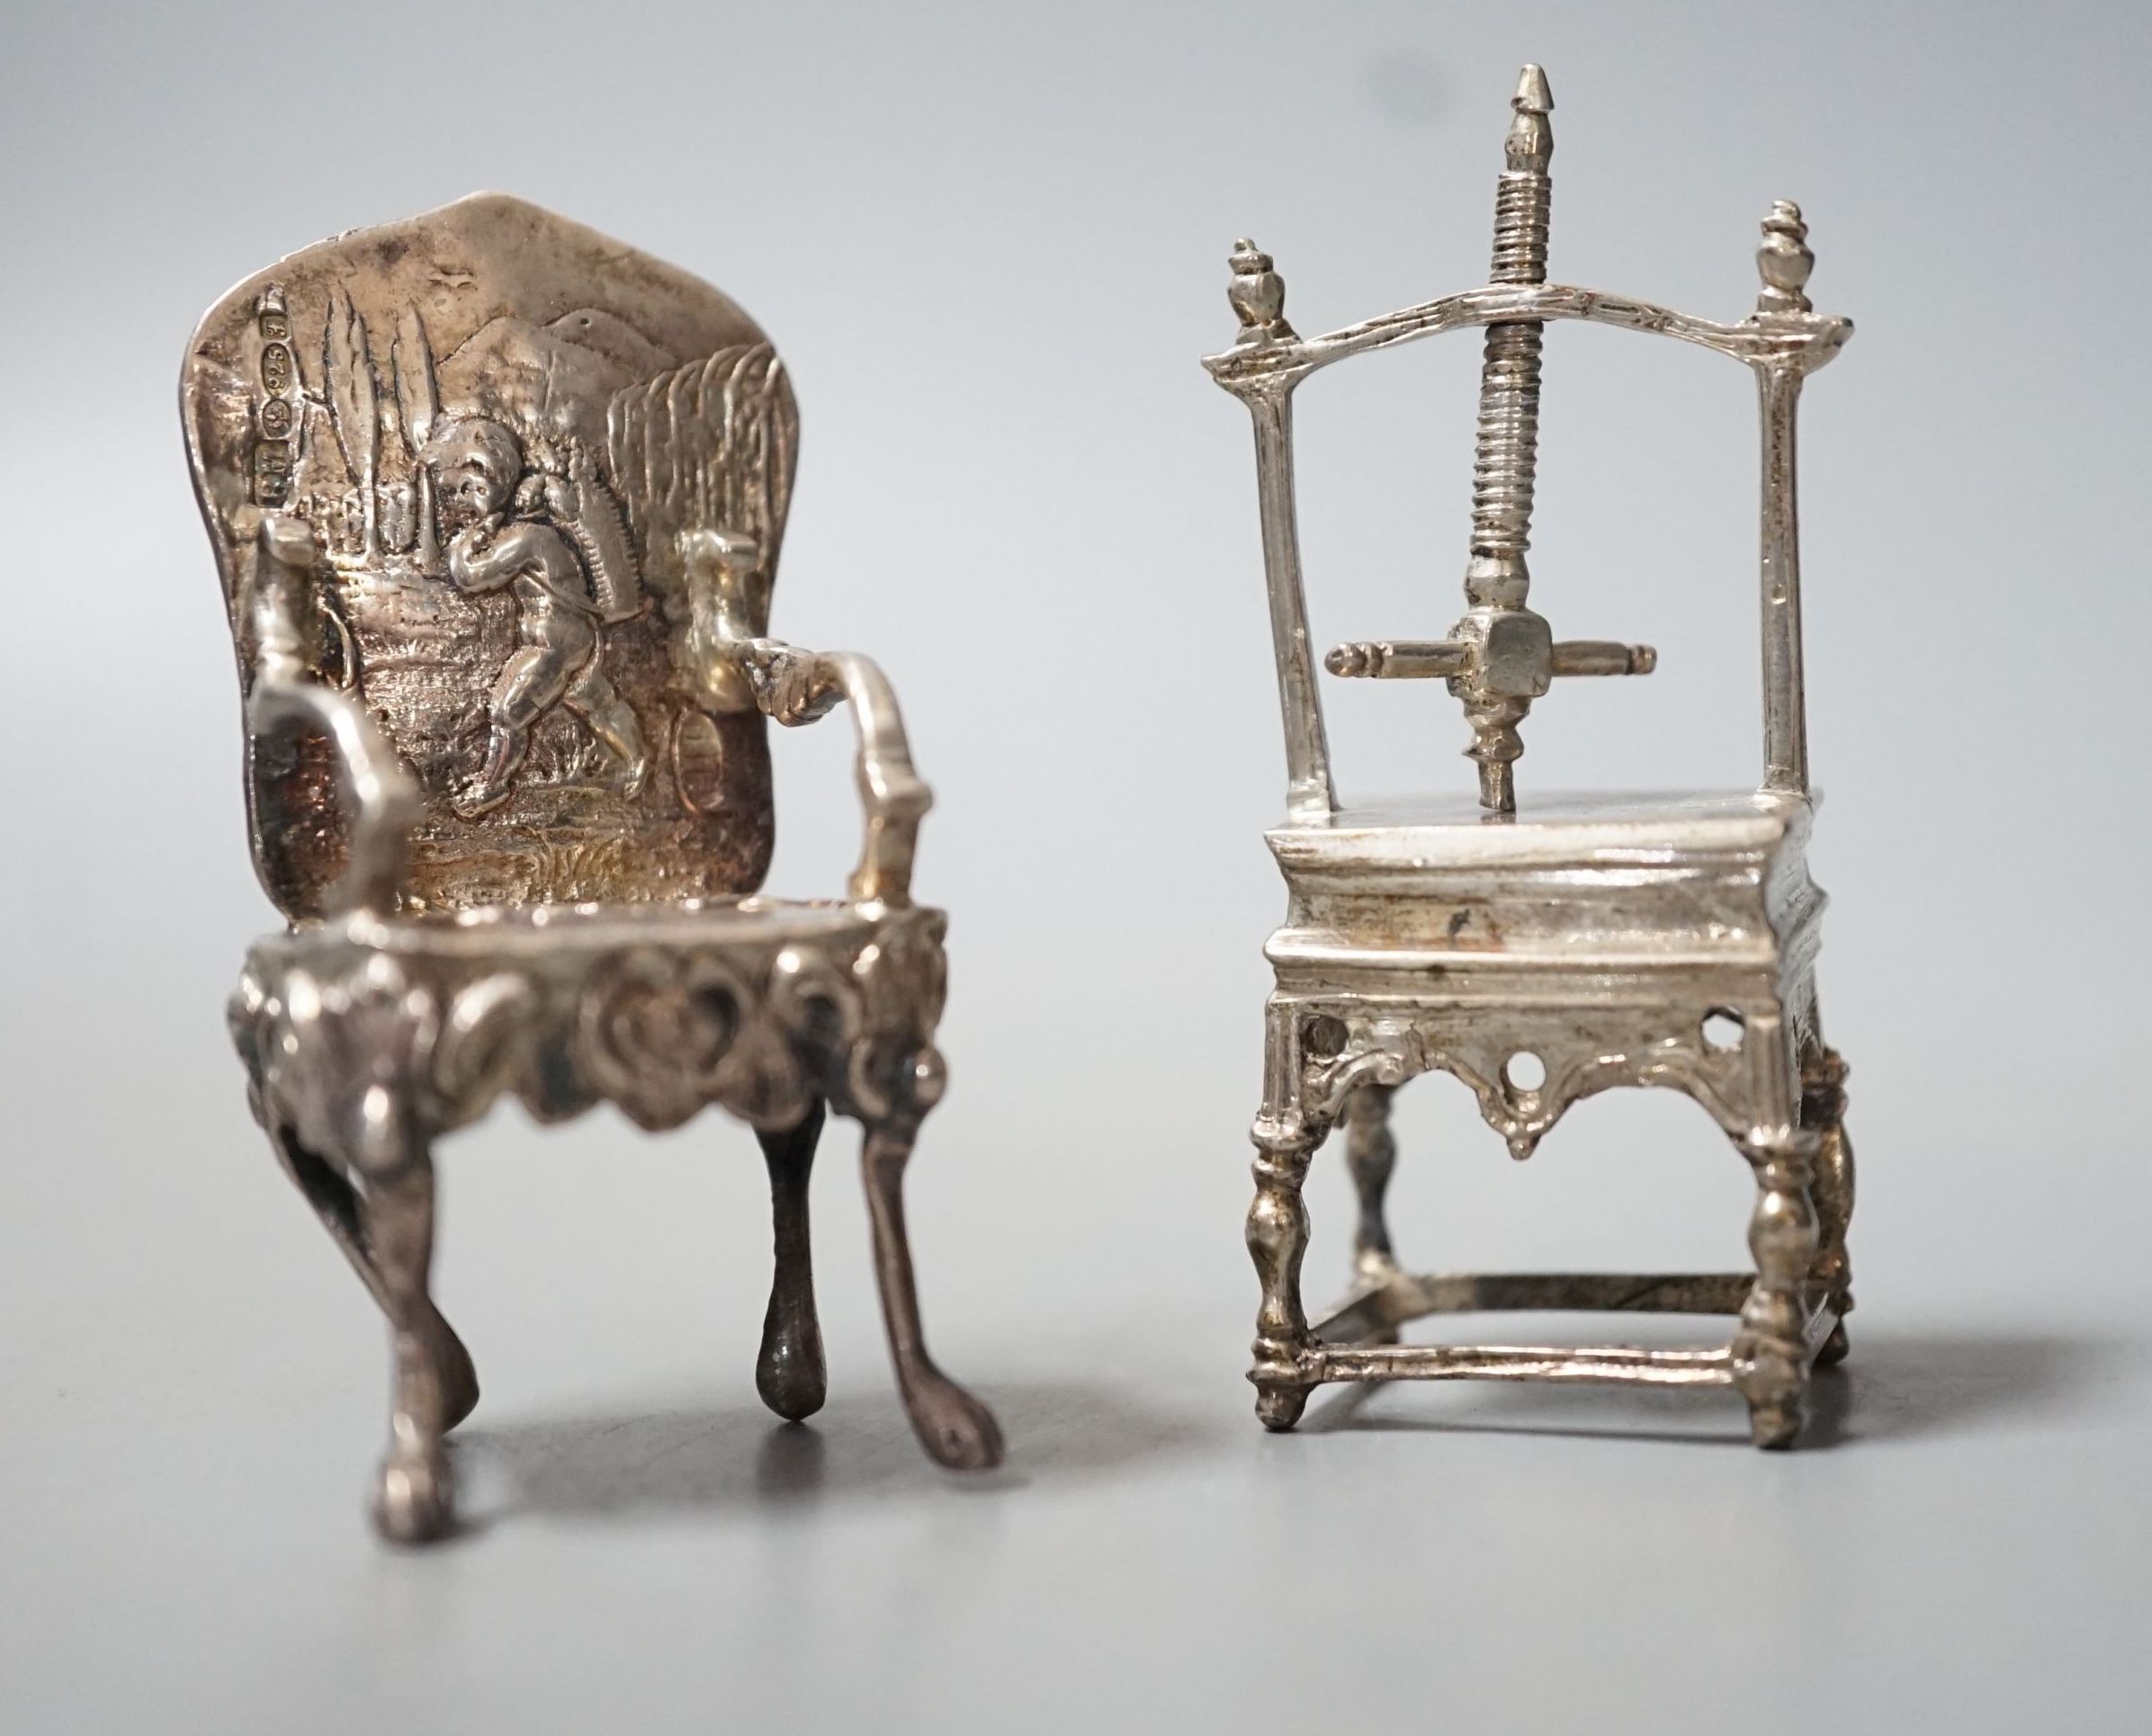 An Edwardian silver miniature model of an armchair, import marks for Glasgow, 1902, 64mm and a white metal model of a press.